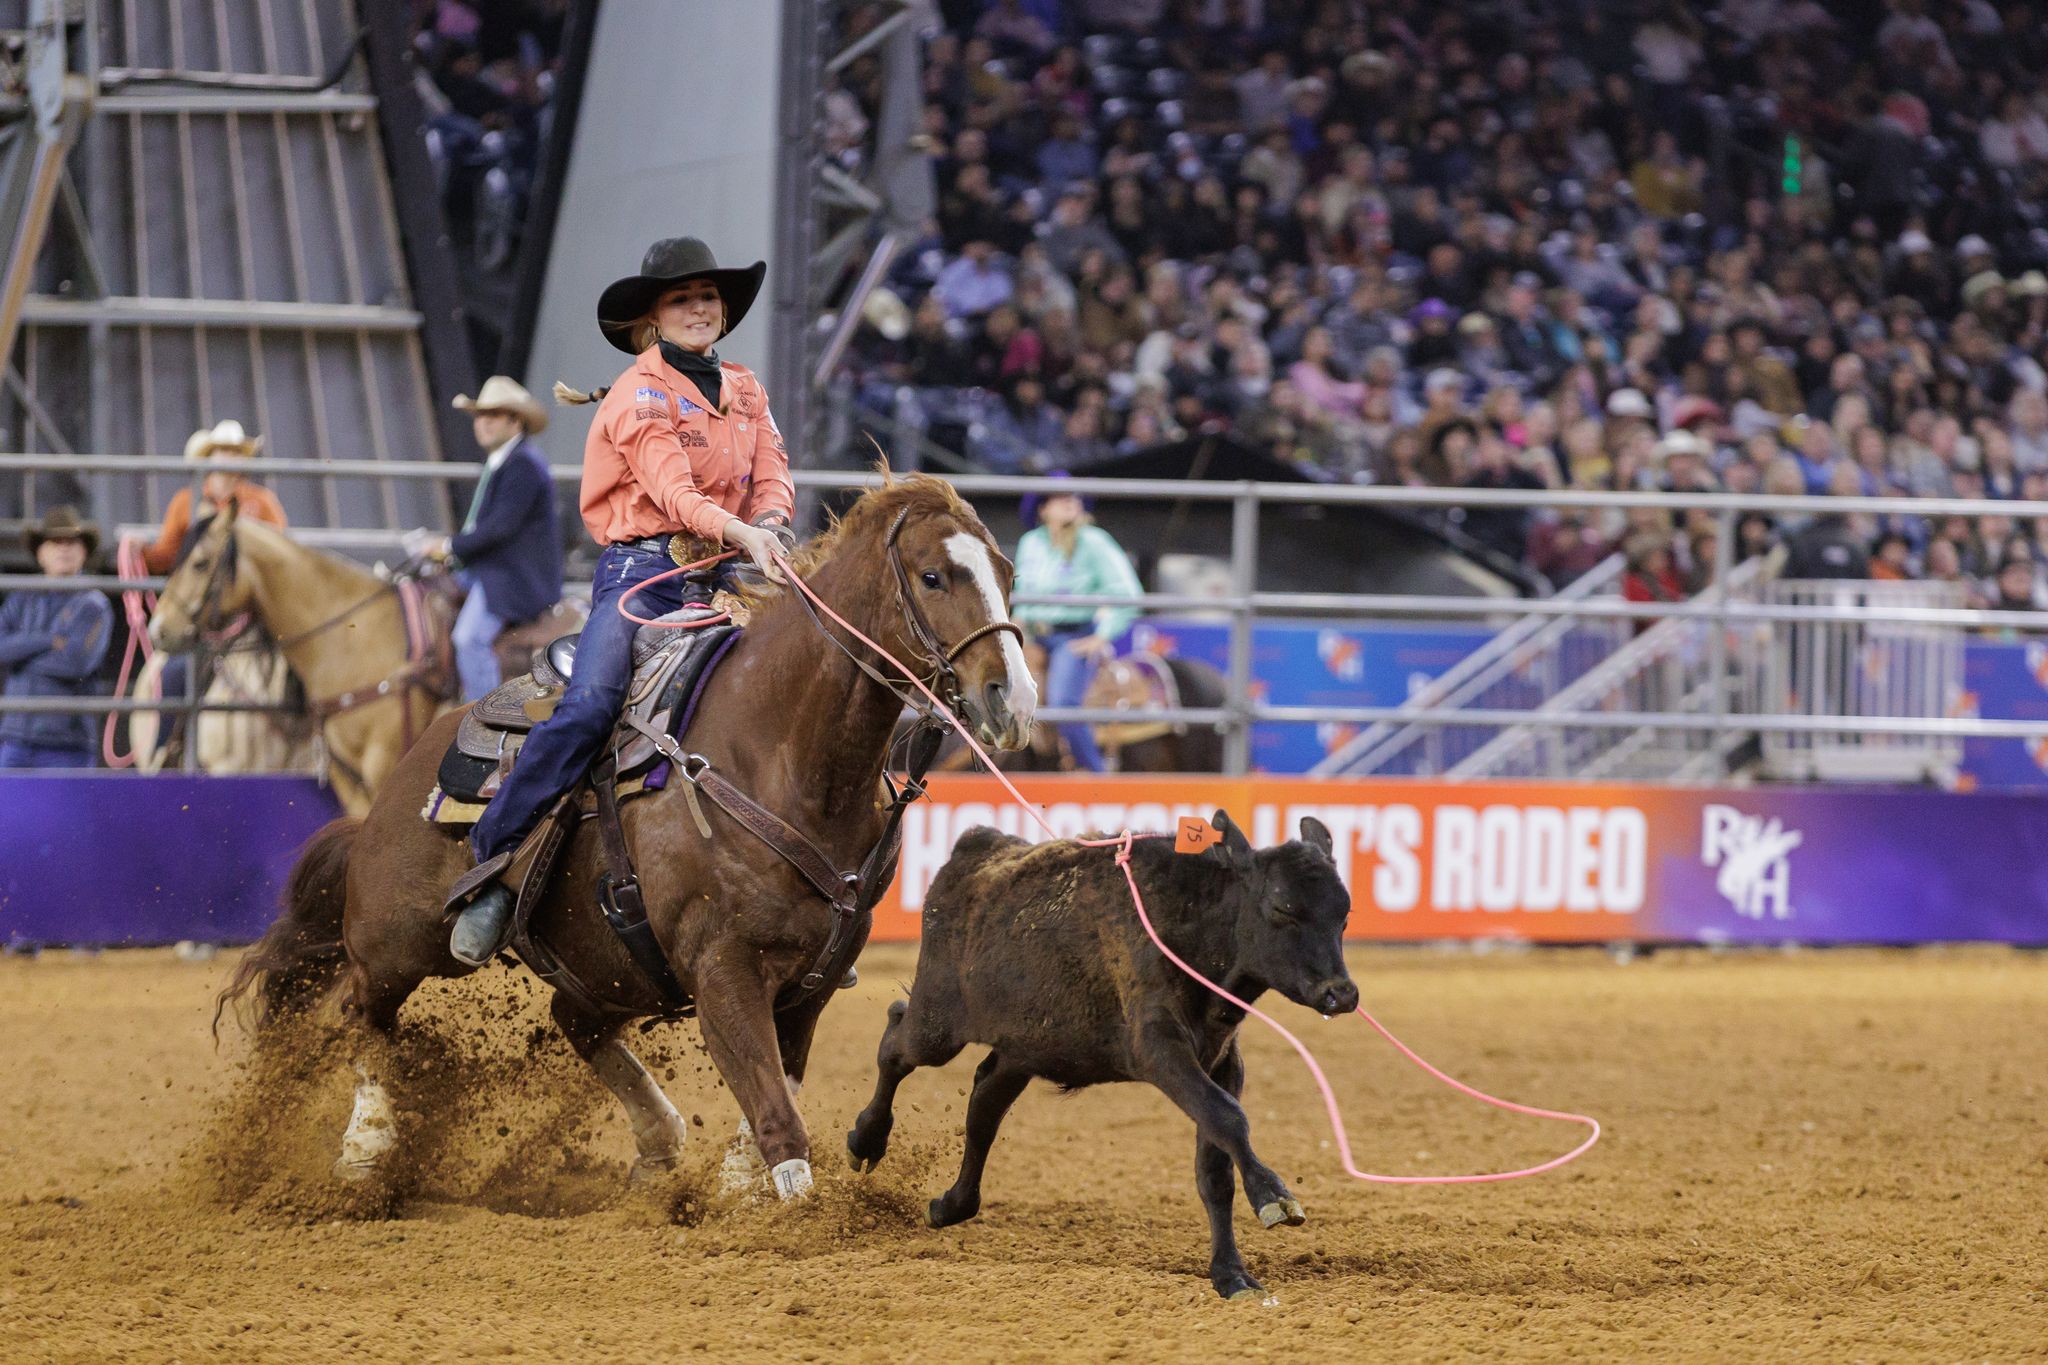 Hali Williams Leads The World With Rodeohouston Win